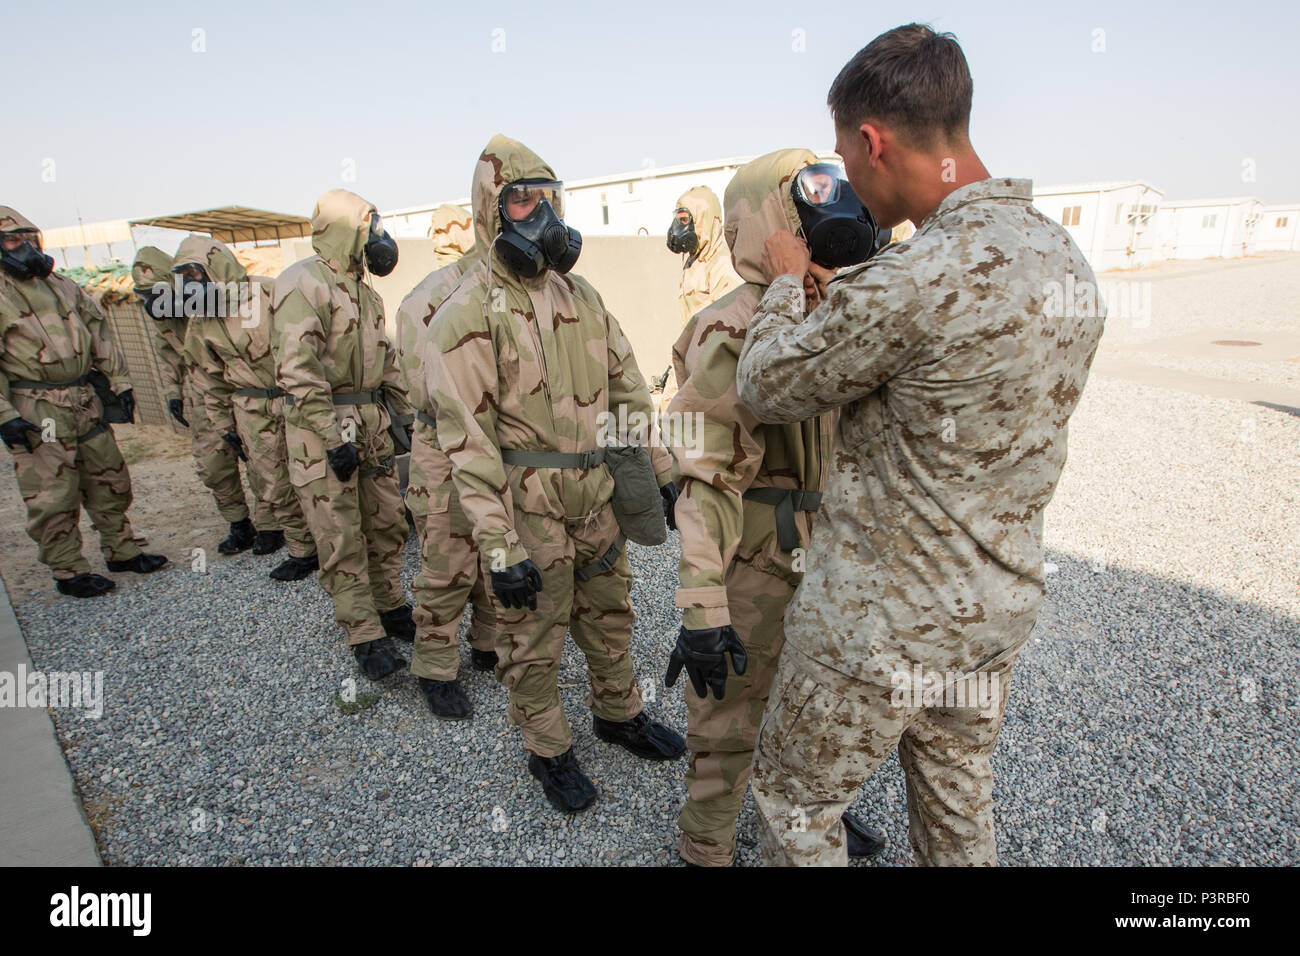 U.S. Marine Cpl. Travis Knigge, right, a Chemical, Biological, Radiological and Nuclear Defense specialist with Special Purpose Marine Air-Ground Task Force - Crisis Response - Central Command, inspects a Marine’s gas mask during a Reconnaissance, Surveillance and Decontamination course run by Chemical, Biological, Radiological and Nuclear Defense Marines while forward deployed, July 16, 2016. SPMAGTF-CR-CC is a crisis response unit that has the ability to project combat power throughout the Central Command area of responsibility, using organic aviation, logistical, and ground combat assets. ( Stock Photo